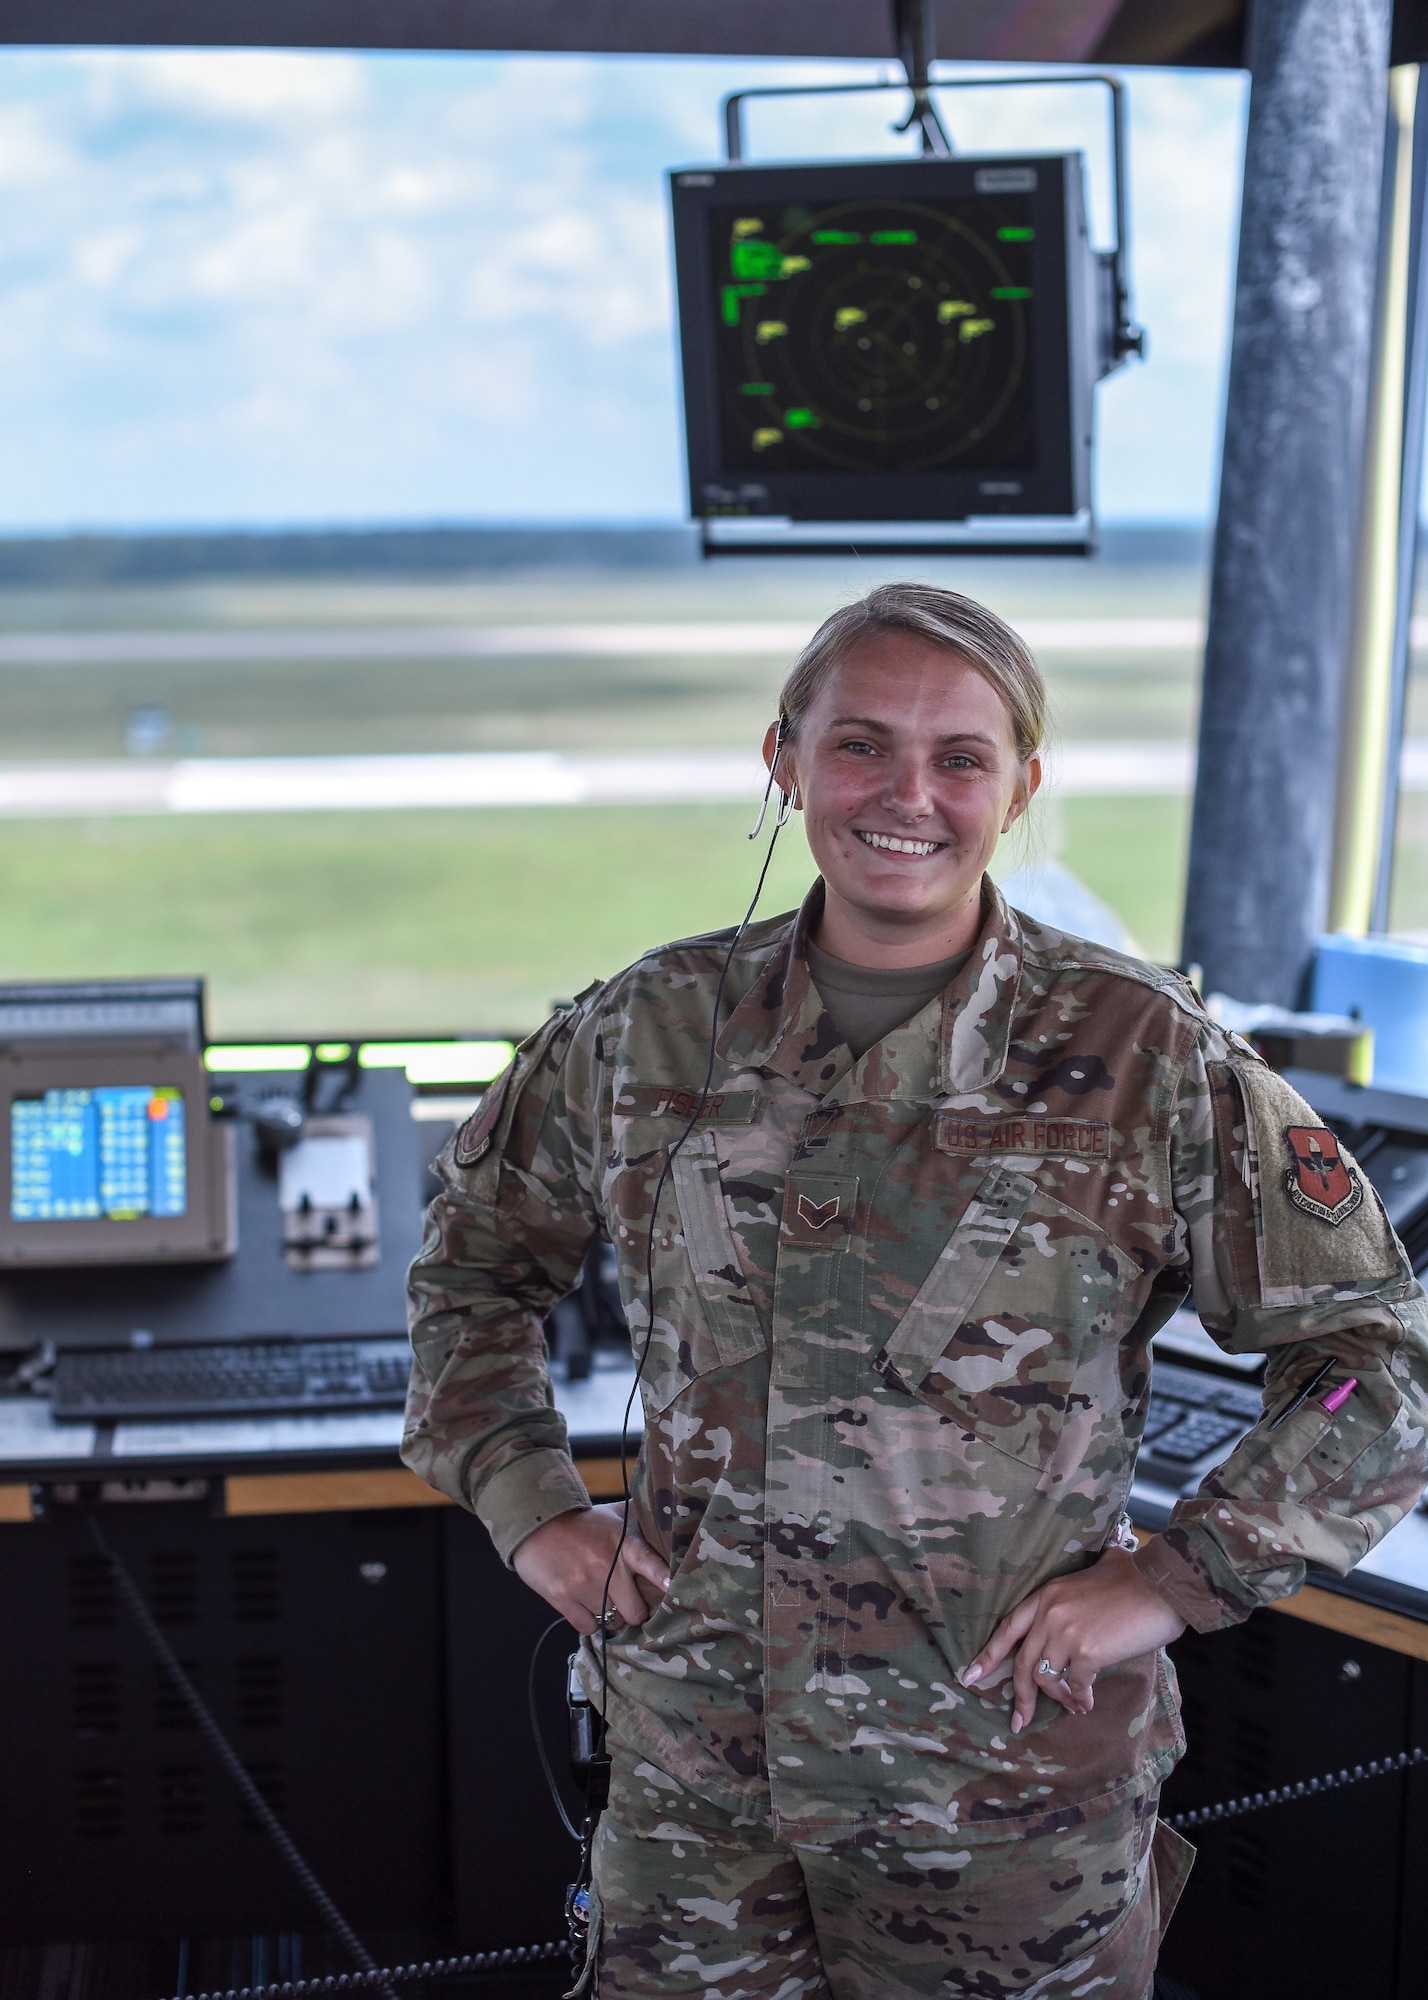 Senior Airman Miranda Fisher, 14th Operations Support Squadron Air Traffic Controller, poses for a photo August 4, 2020, on Columbus Air Force Base, Miss. The new Tower Coordinator position is vital in ensuring even safer and overall improved communication between controllers and from the tower to the pilots. (U.S. Air Force photo by Senior Airman Keith Holcomb)